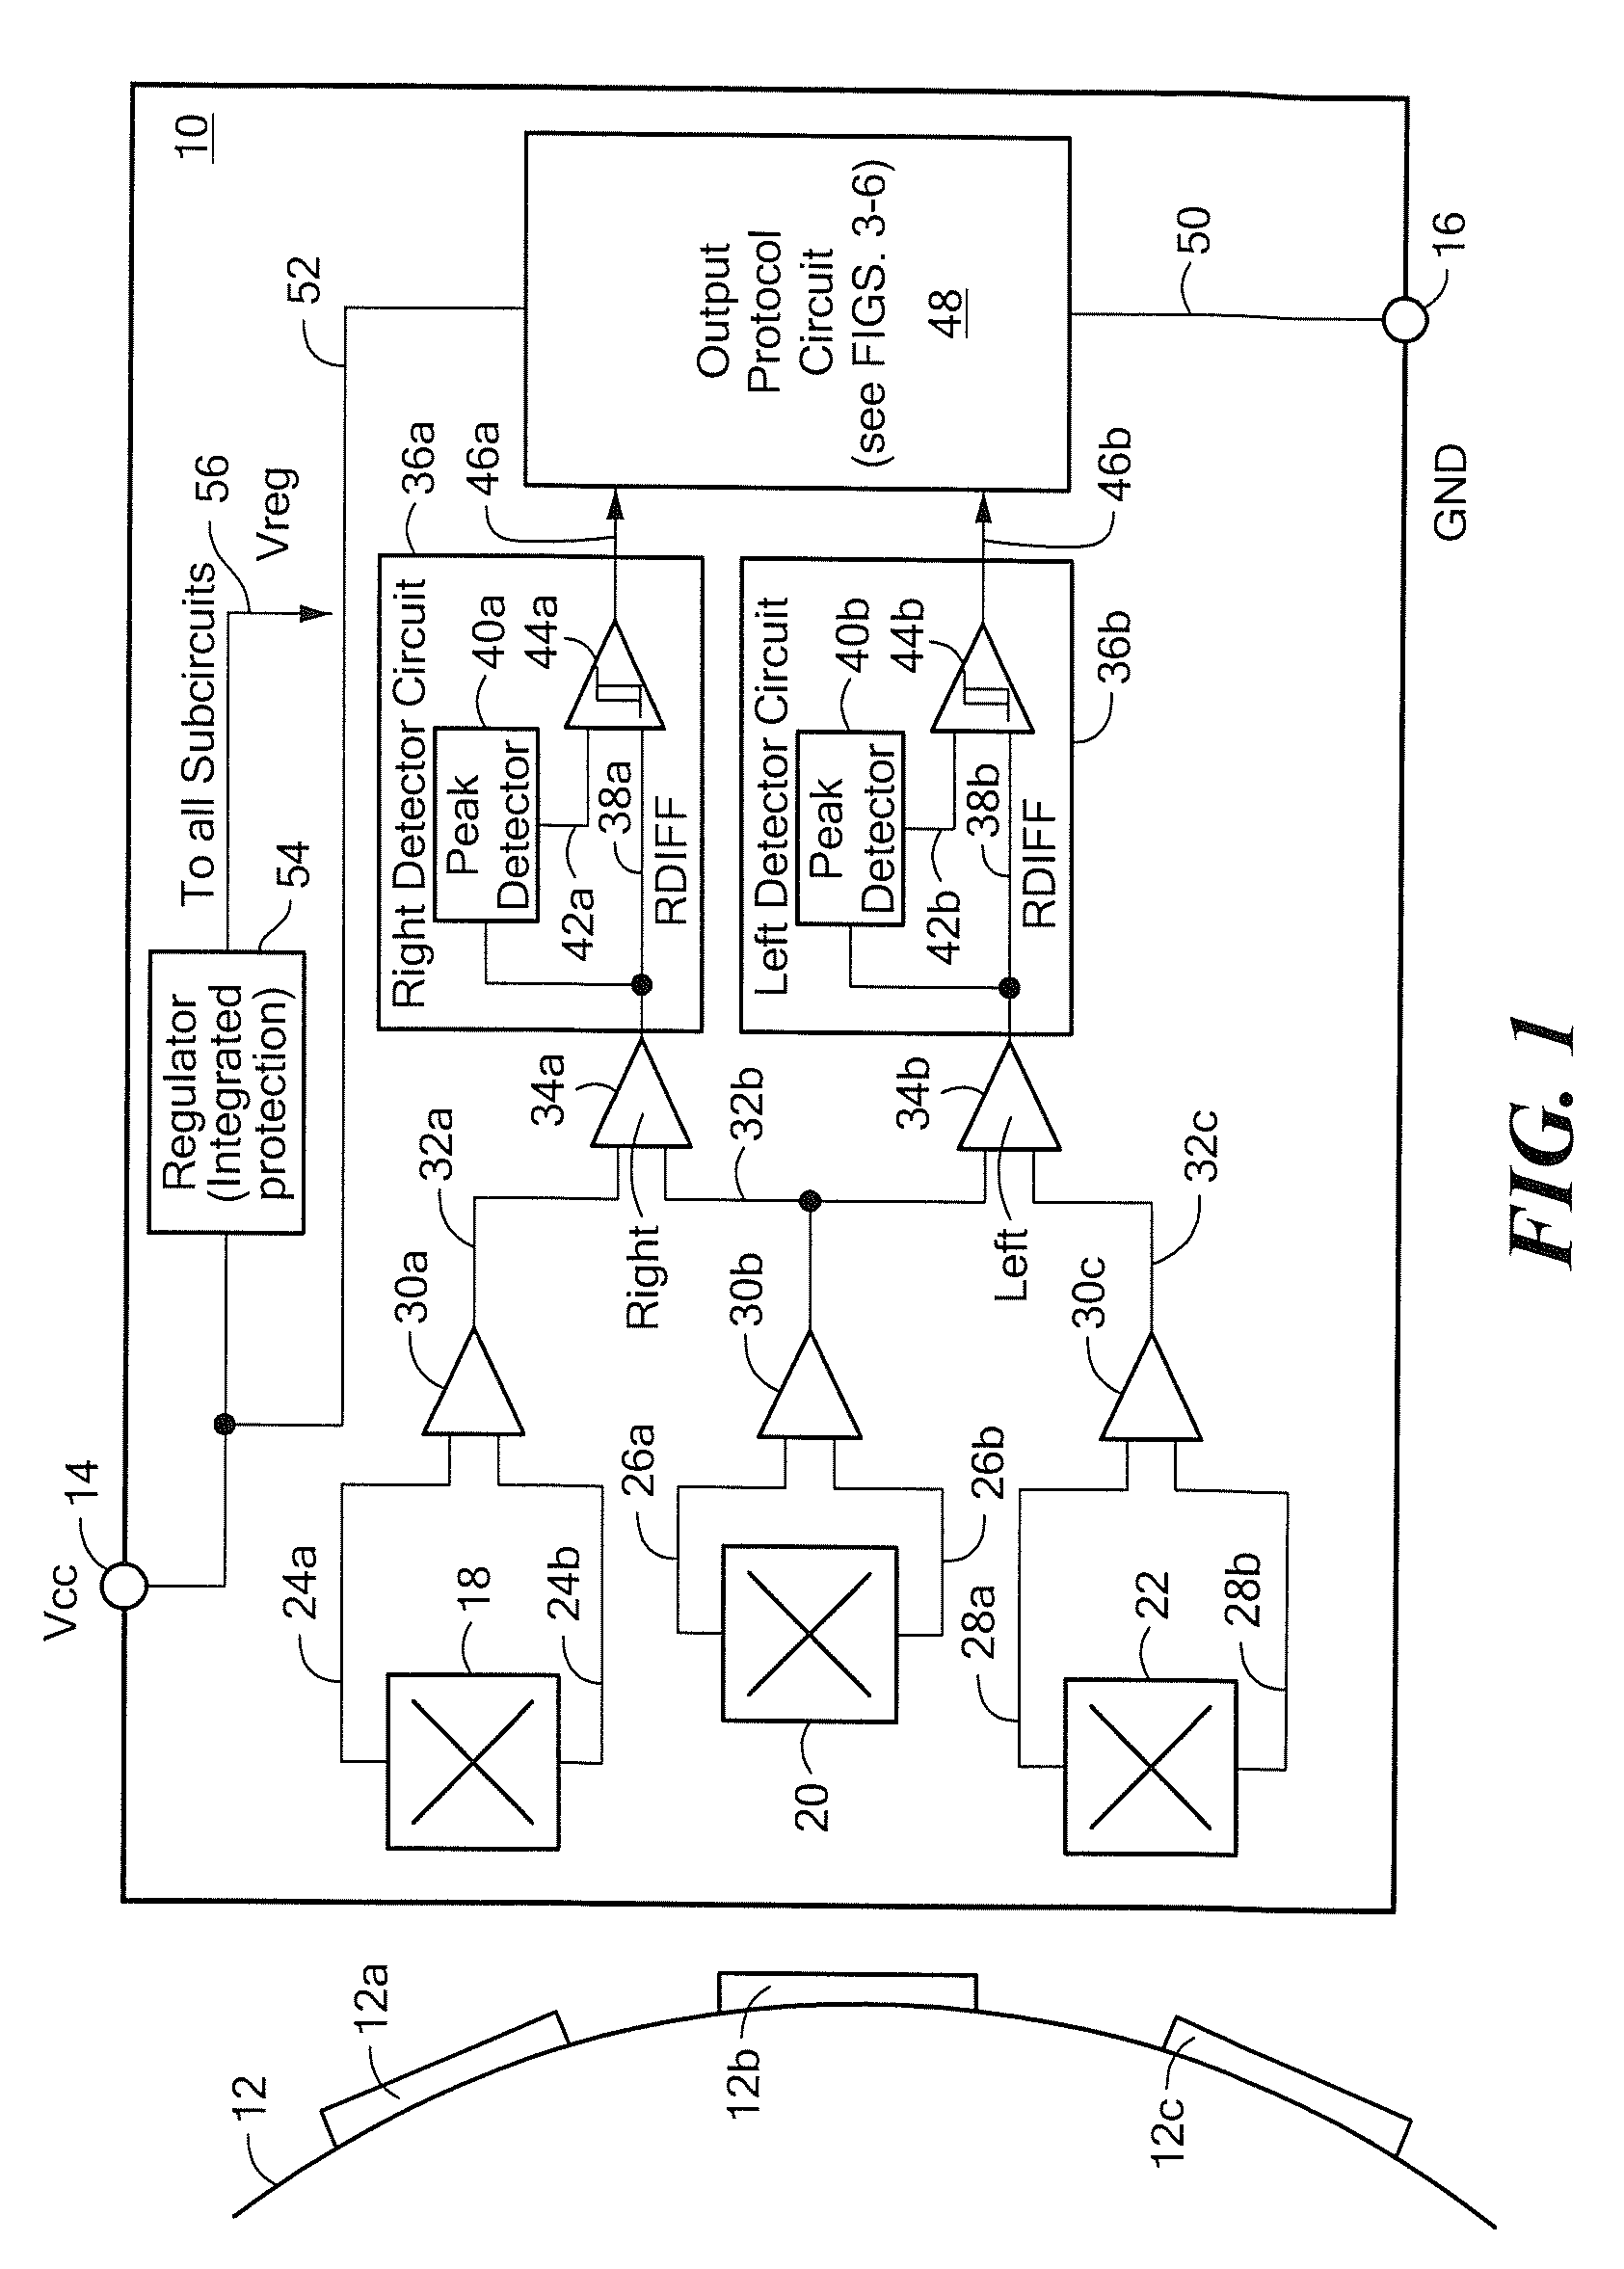 Apparatus and Method for Providing an Output Signal Indicative of a Speed of Rotation and a Direction of Rotation as a Ferromagnetic Object